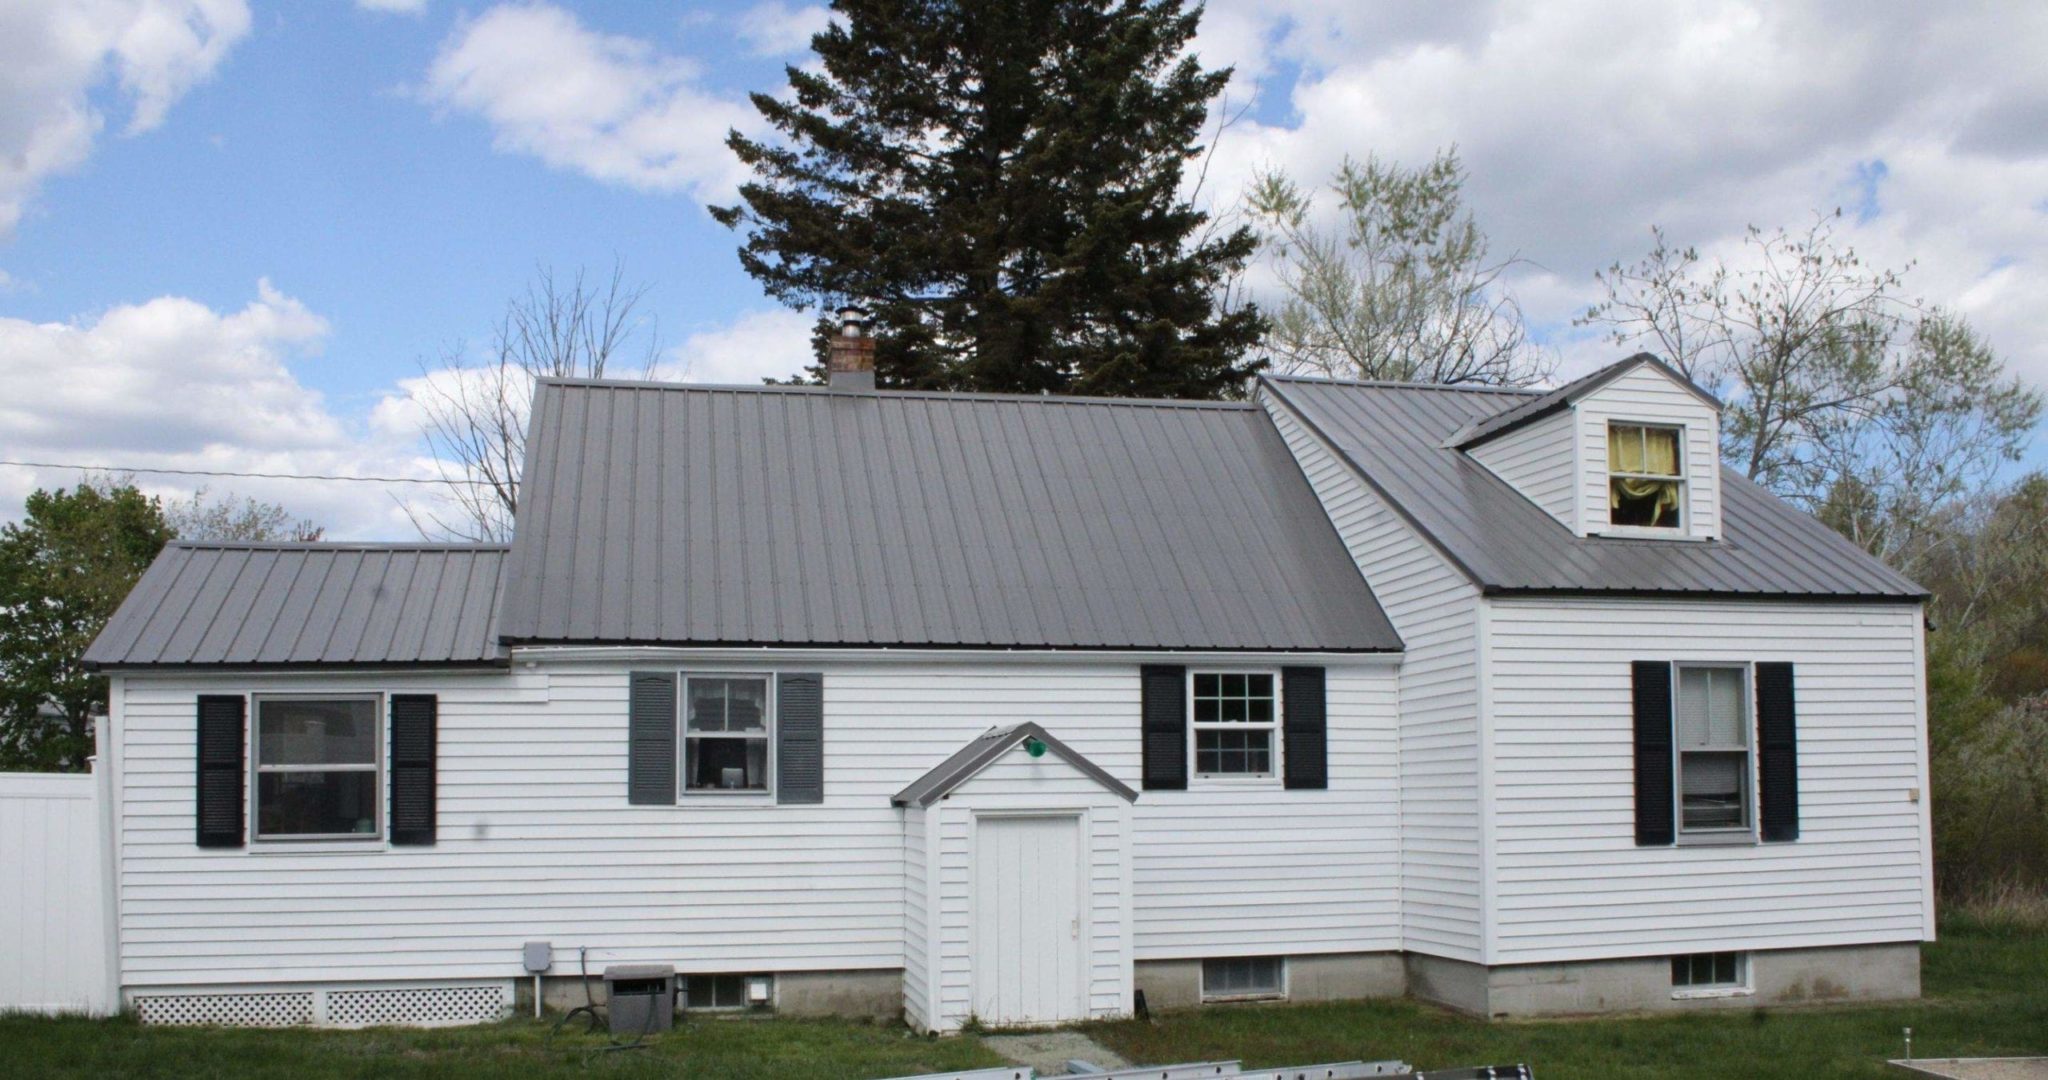 A white home with gray metal roofing and black shutters.